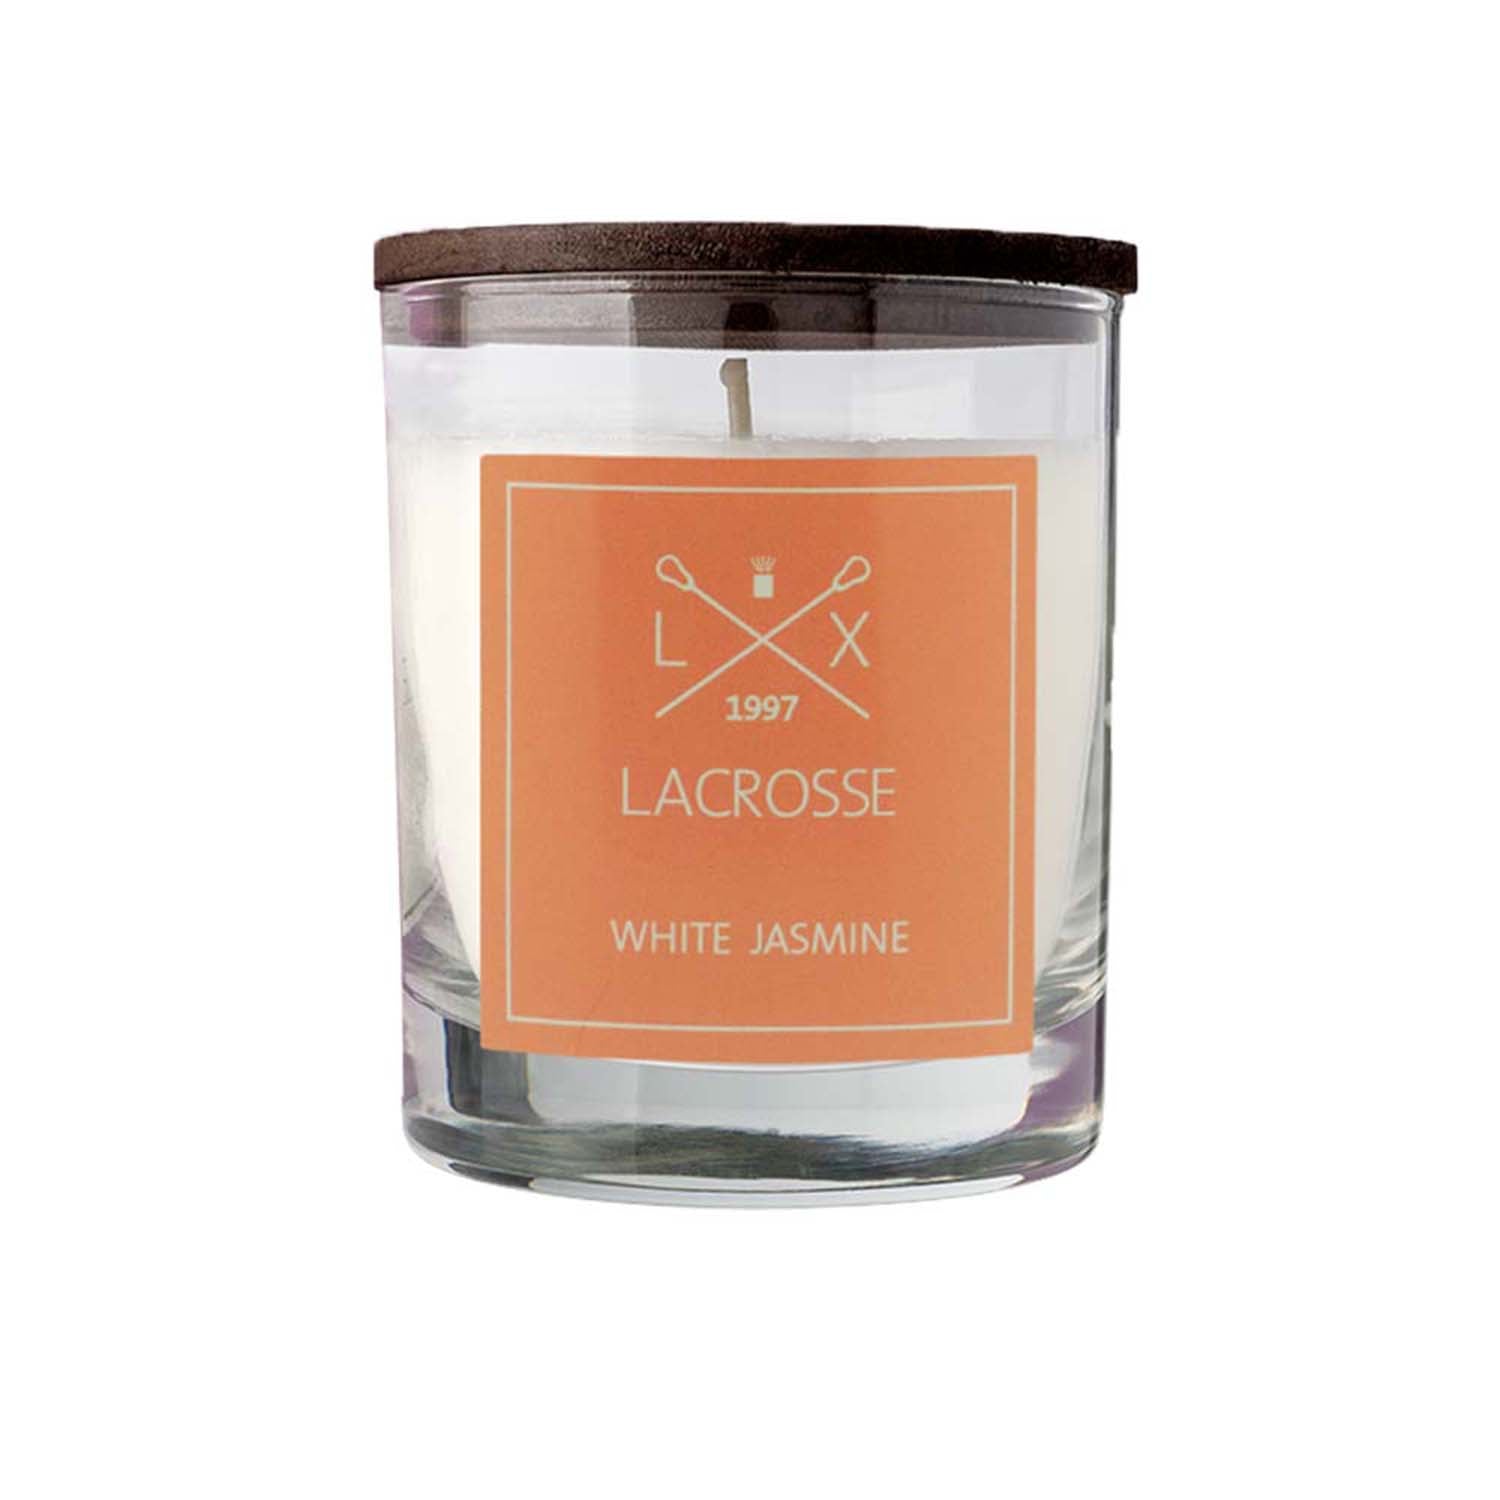 Scented Candle 40h- Lacrosse- White Jasmine